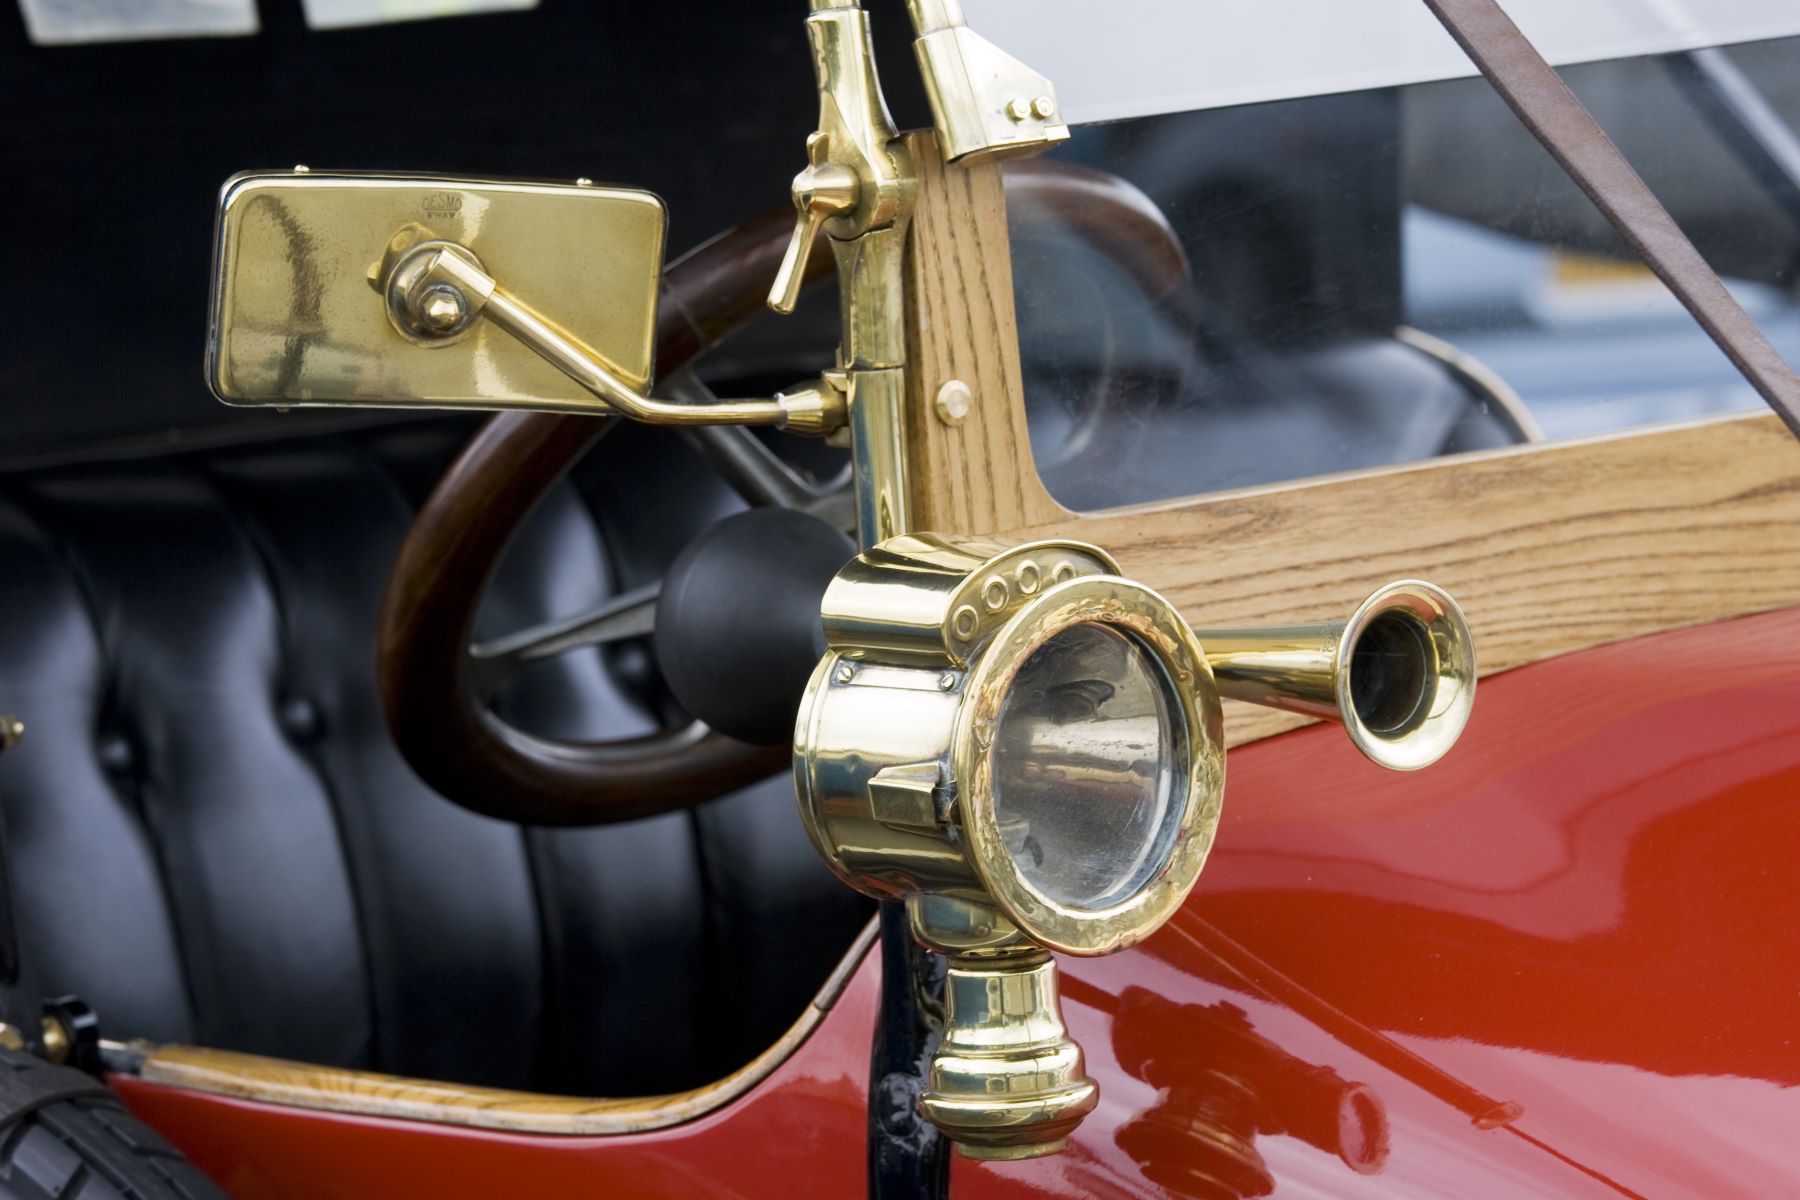 A 1912 Clement-Bayard car with a vintage car horn seen in Gloucestershire, United Kingdom